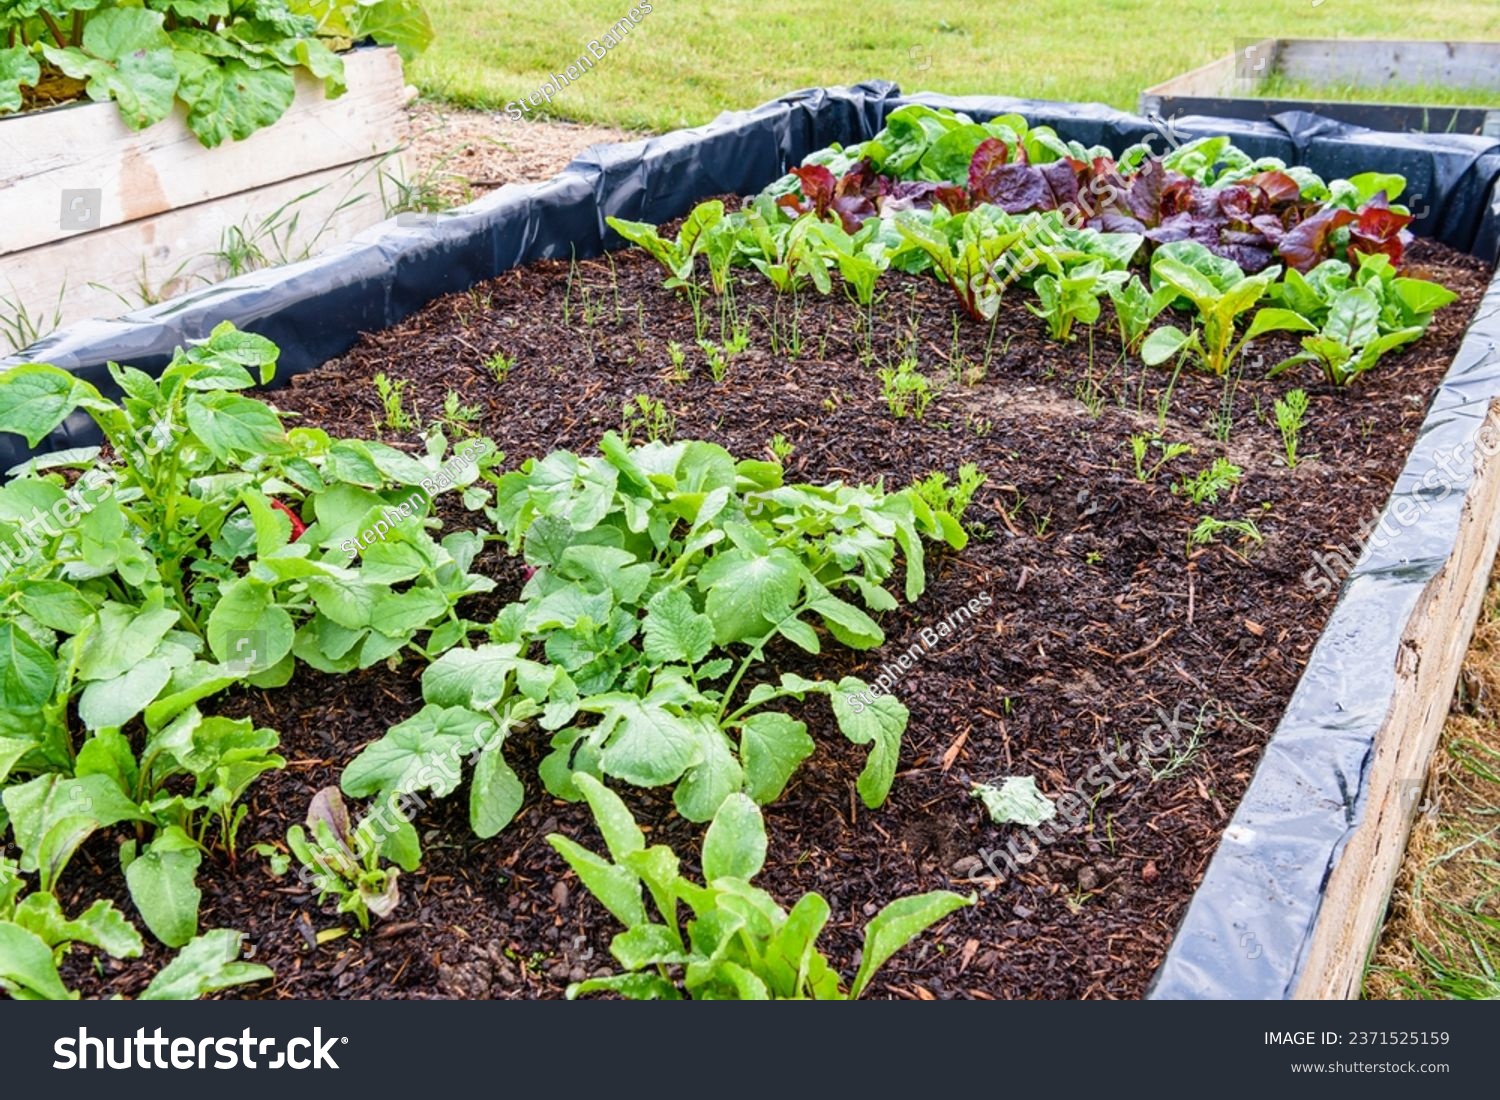 Young radishes, carrots, leeks, chard, lettuce and spinach growing in a raised bed. #2371525159